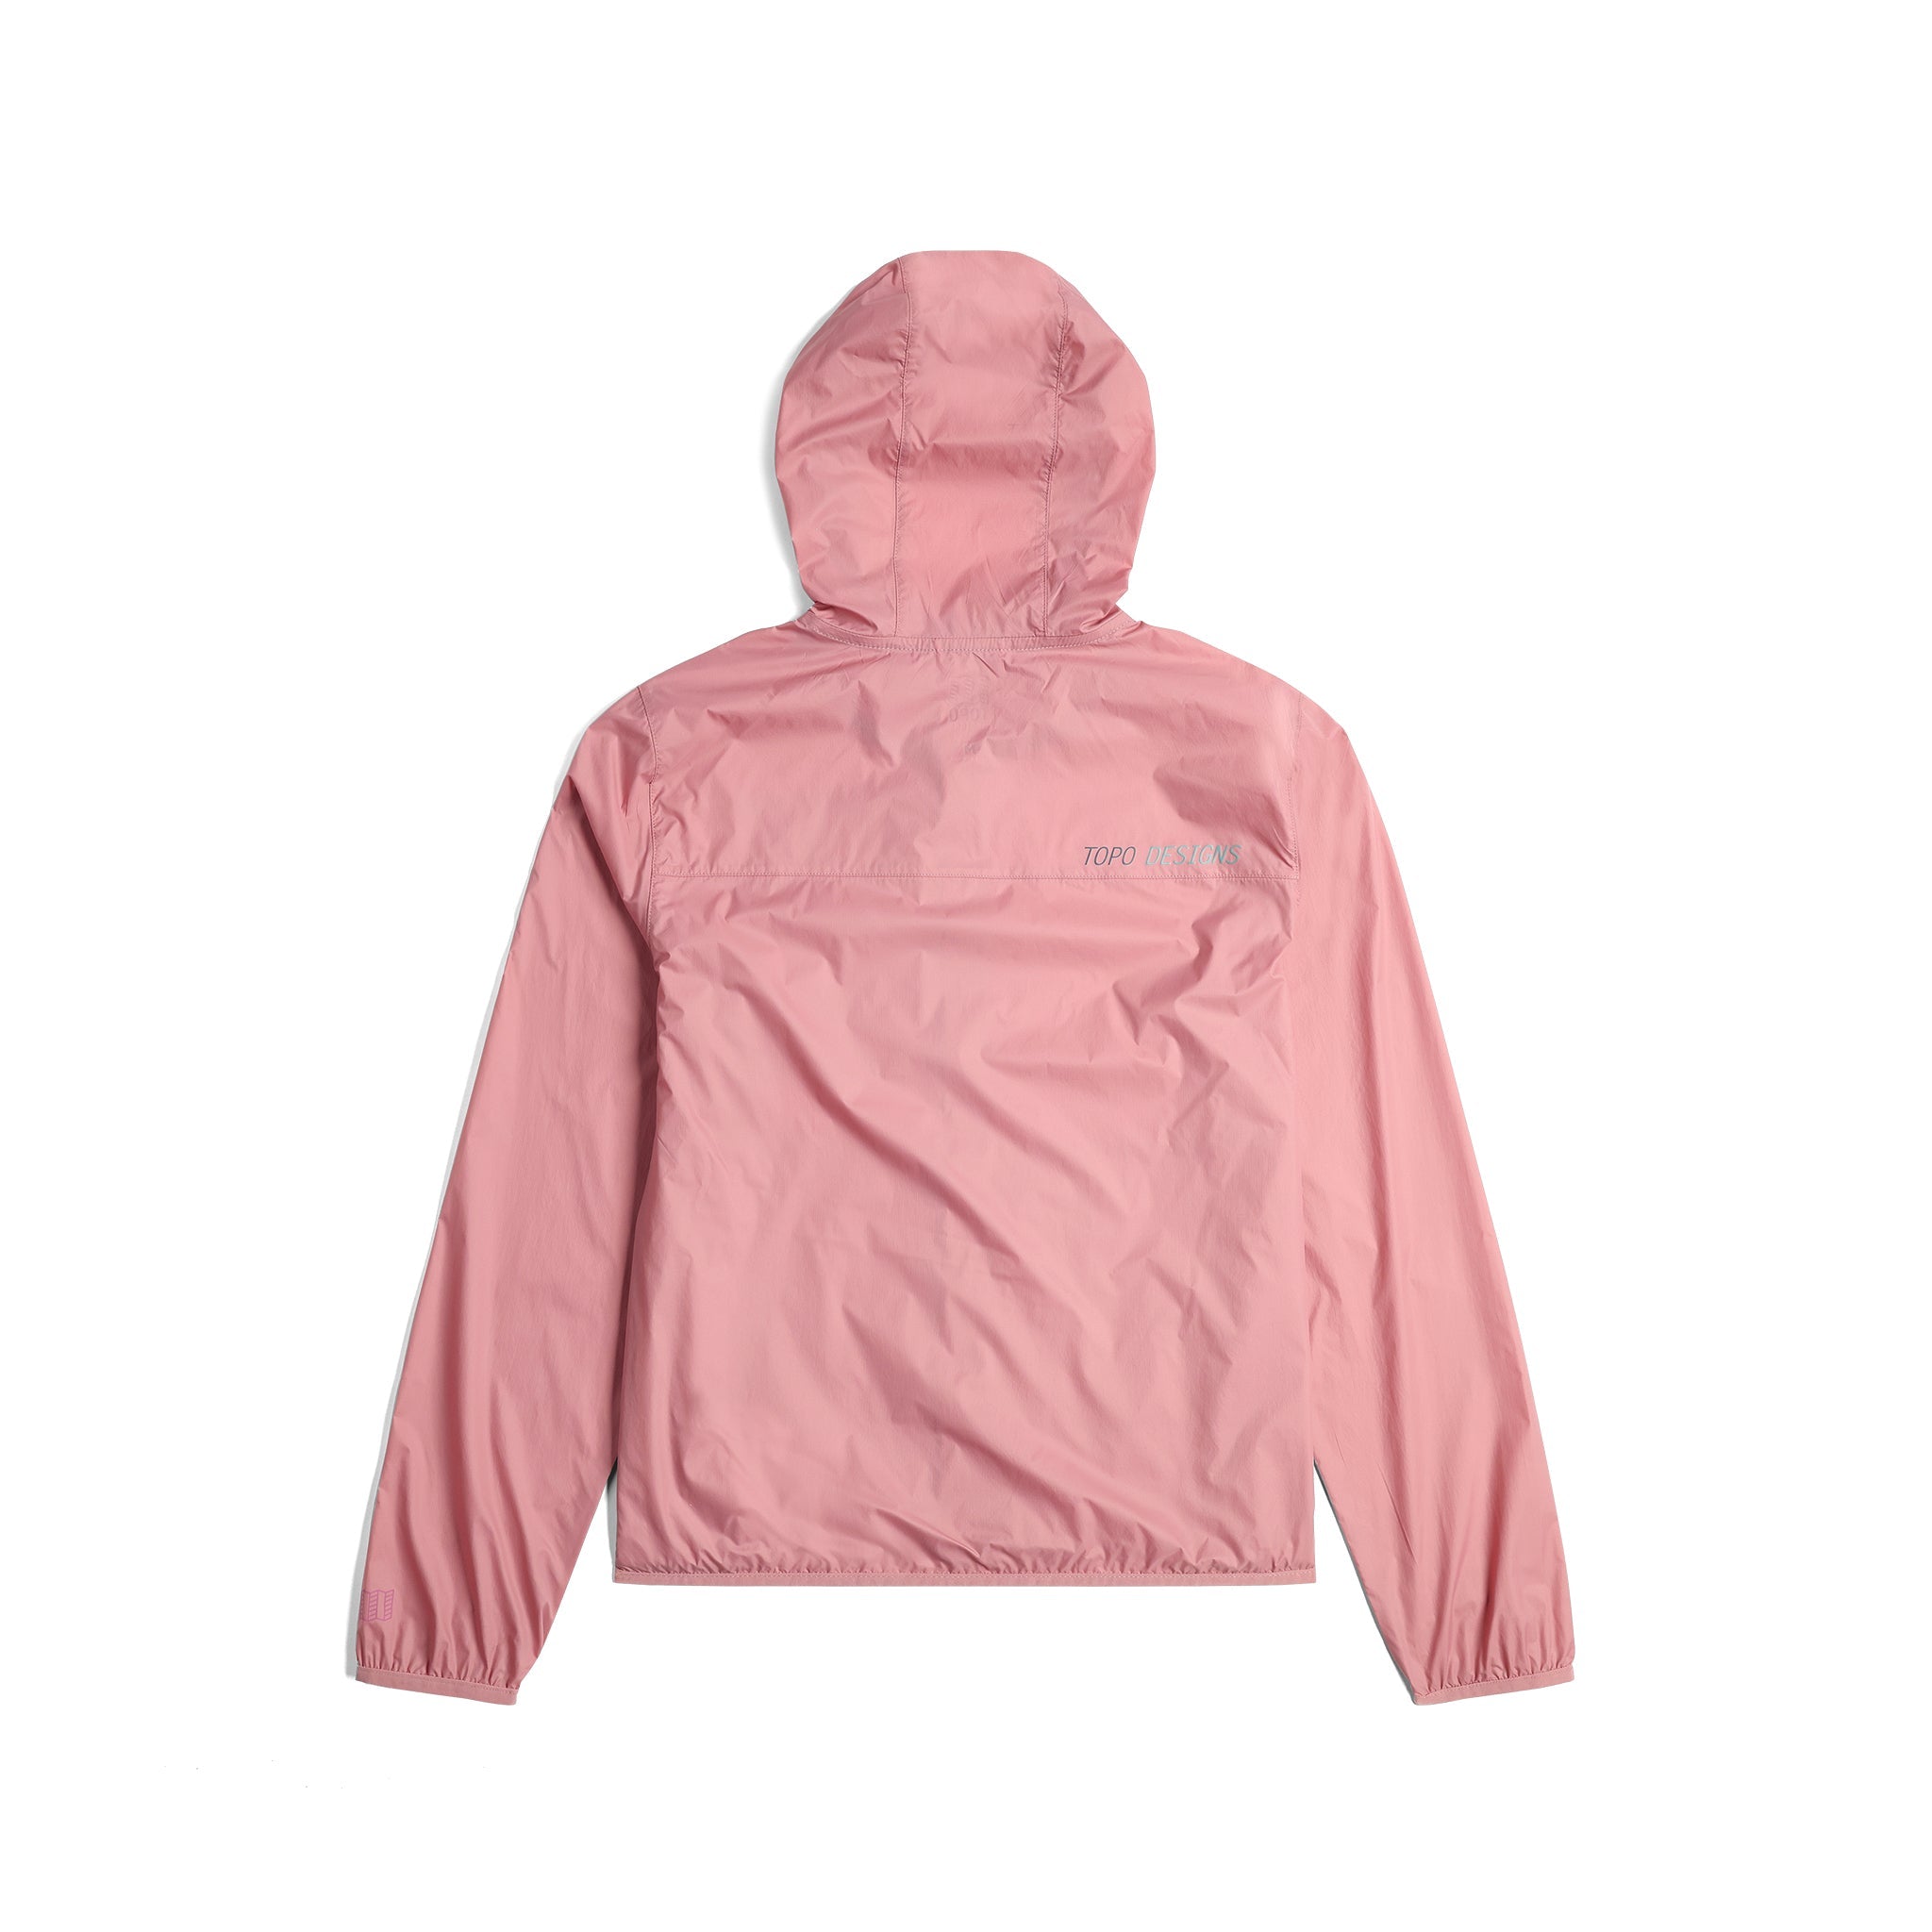 Back View of Topo Designs Global Ultralight Packable Jacket - Women's in "Rose"